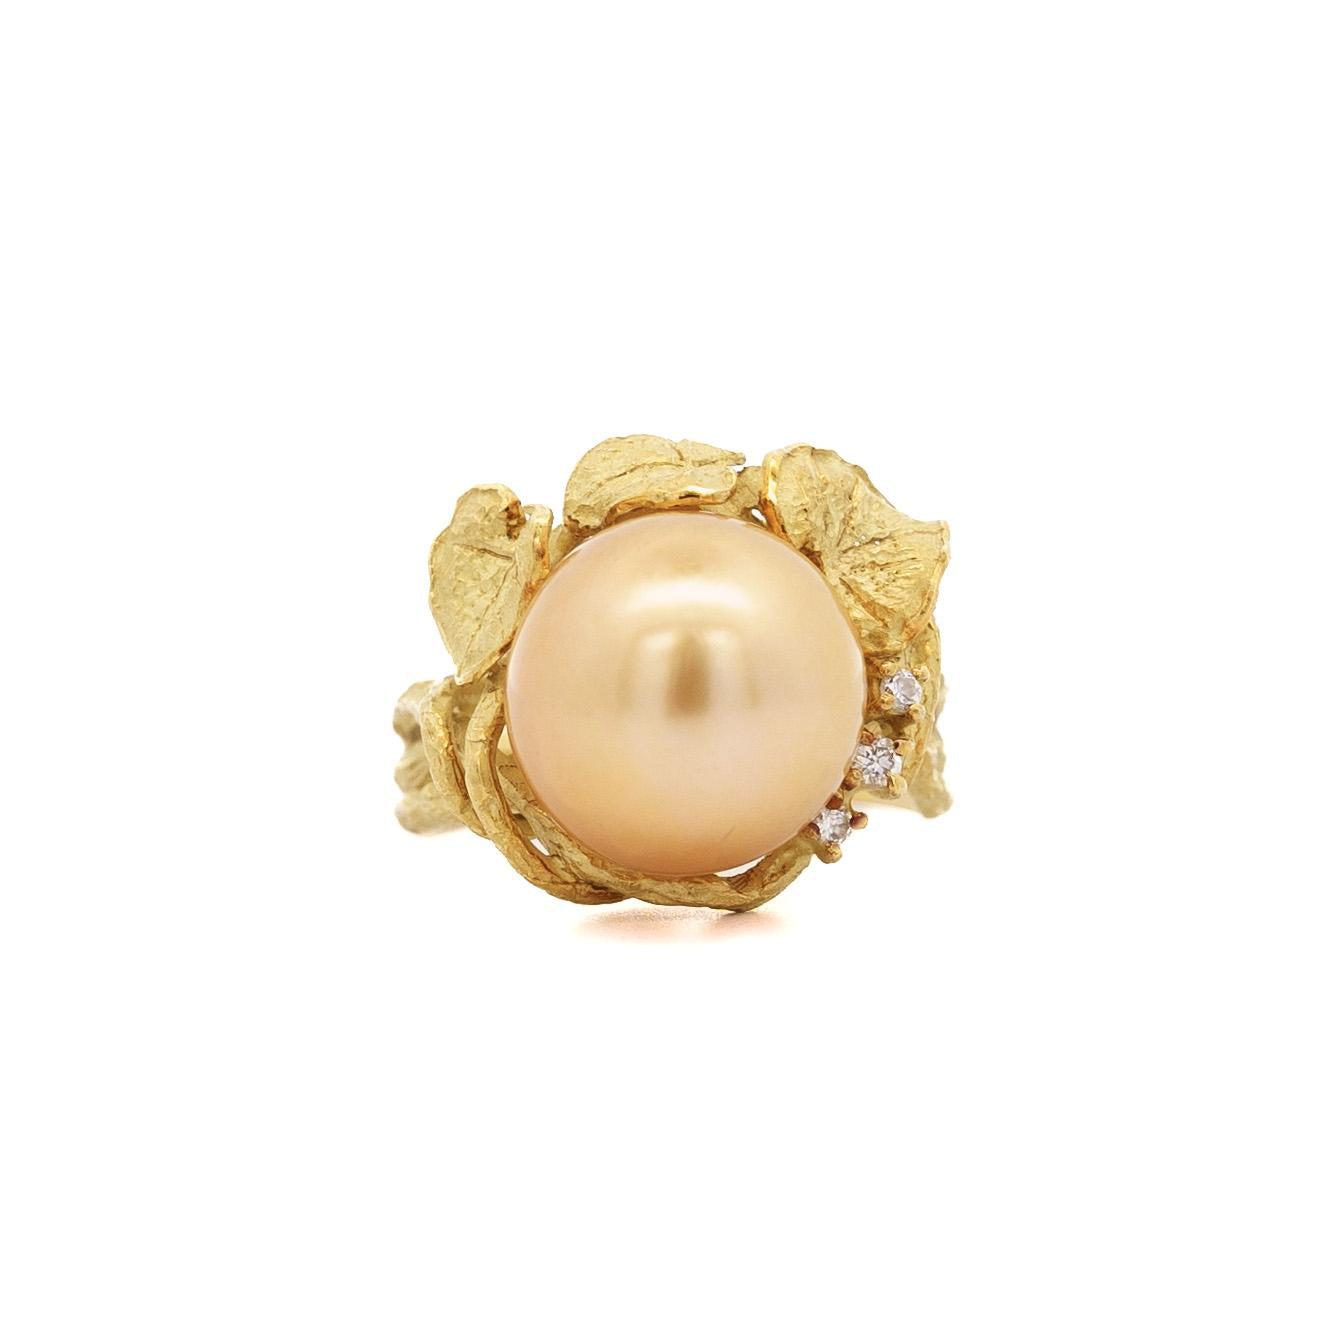 12.8mm Golden South Sea Pearl and Round Cut Diamonds Ring in 18k Yellow Gold